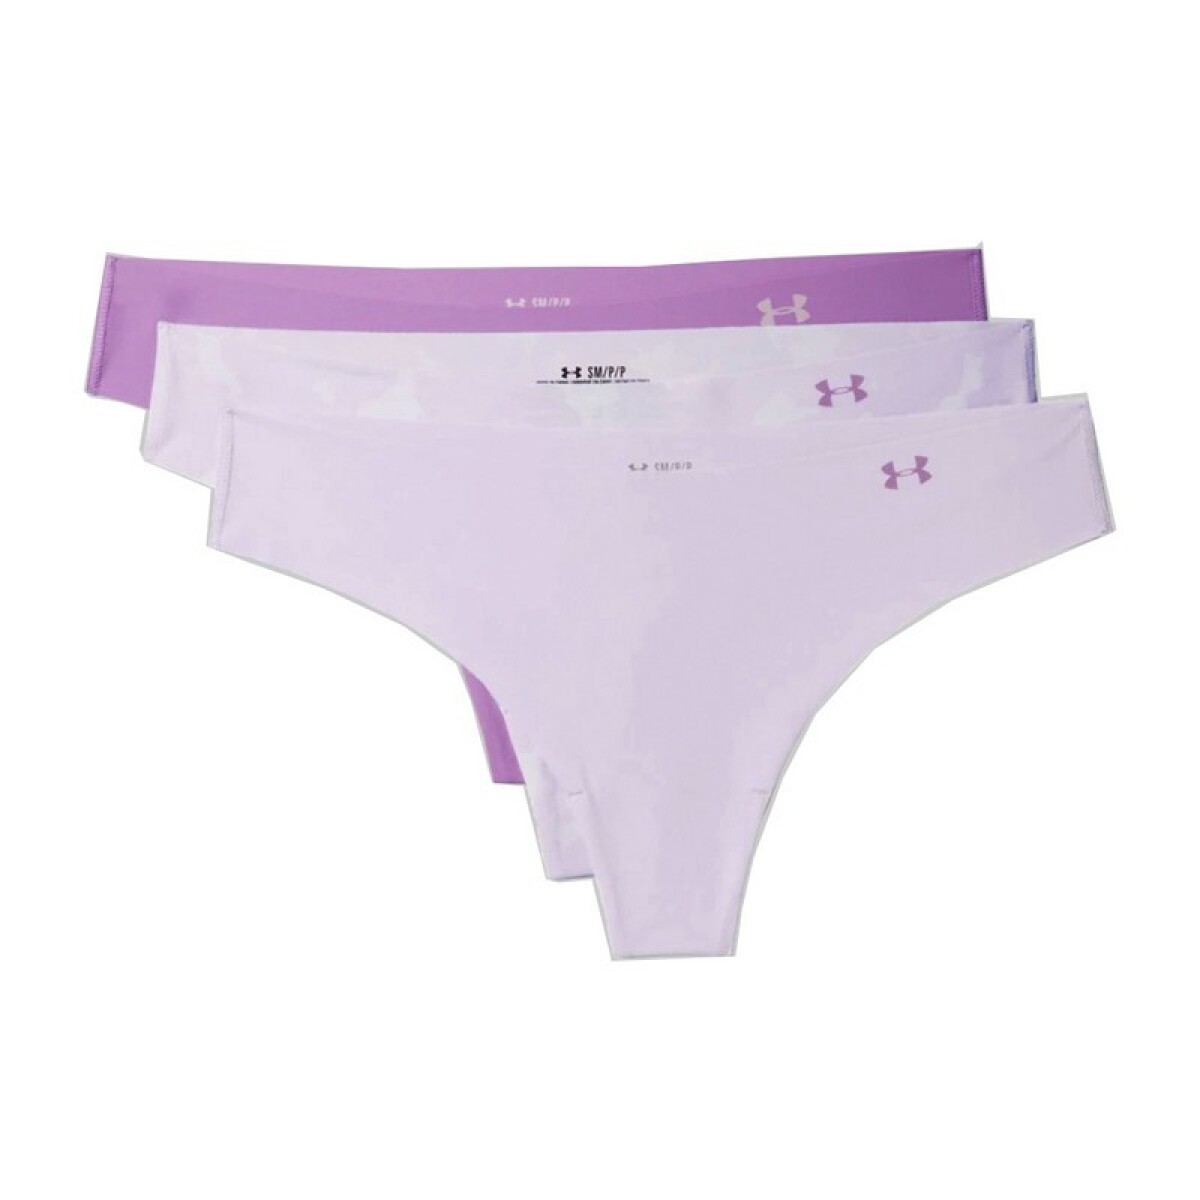 Bombacha Under Armour Thong Pack 3 - Violeta 